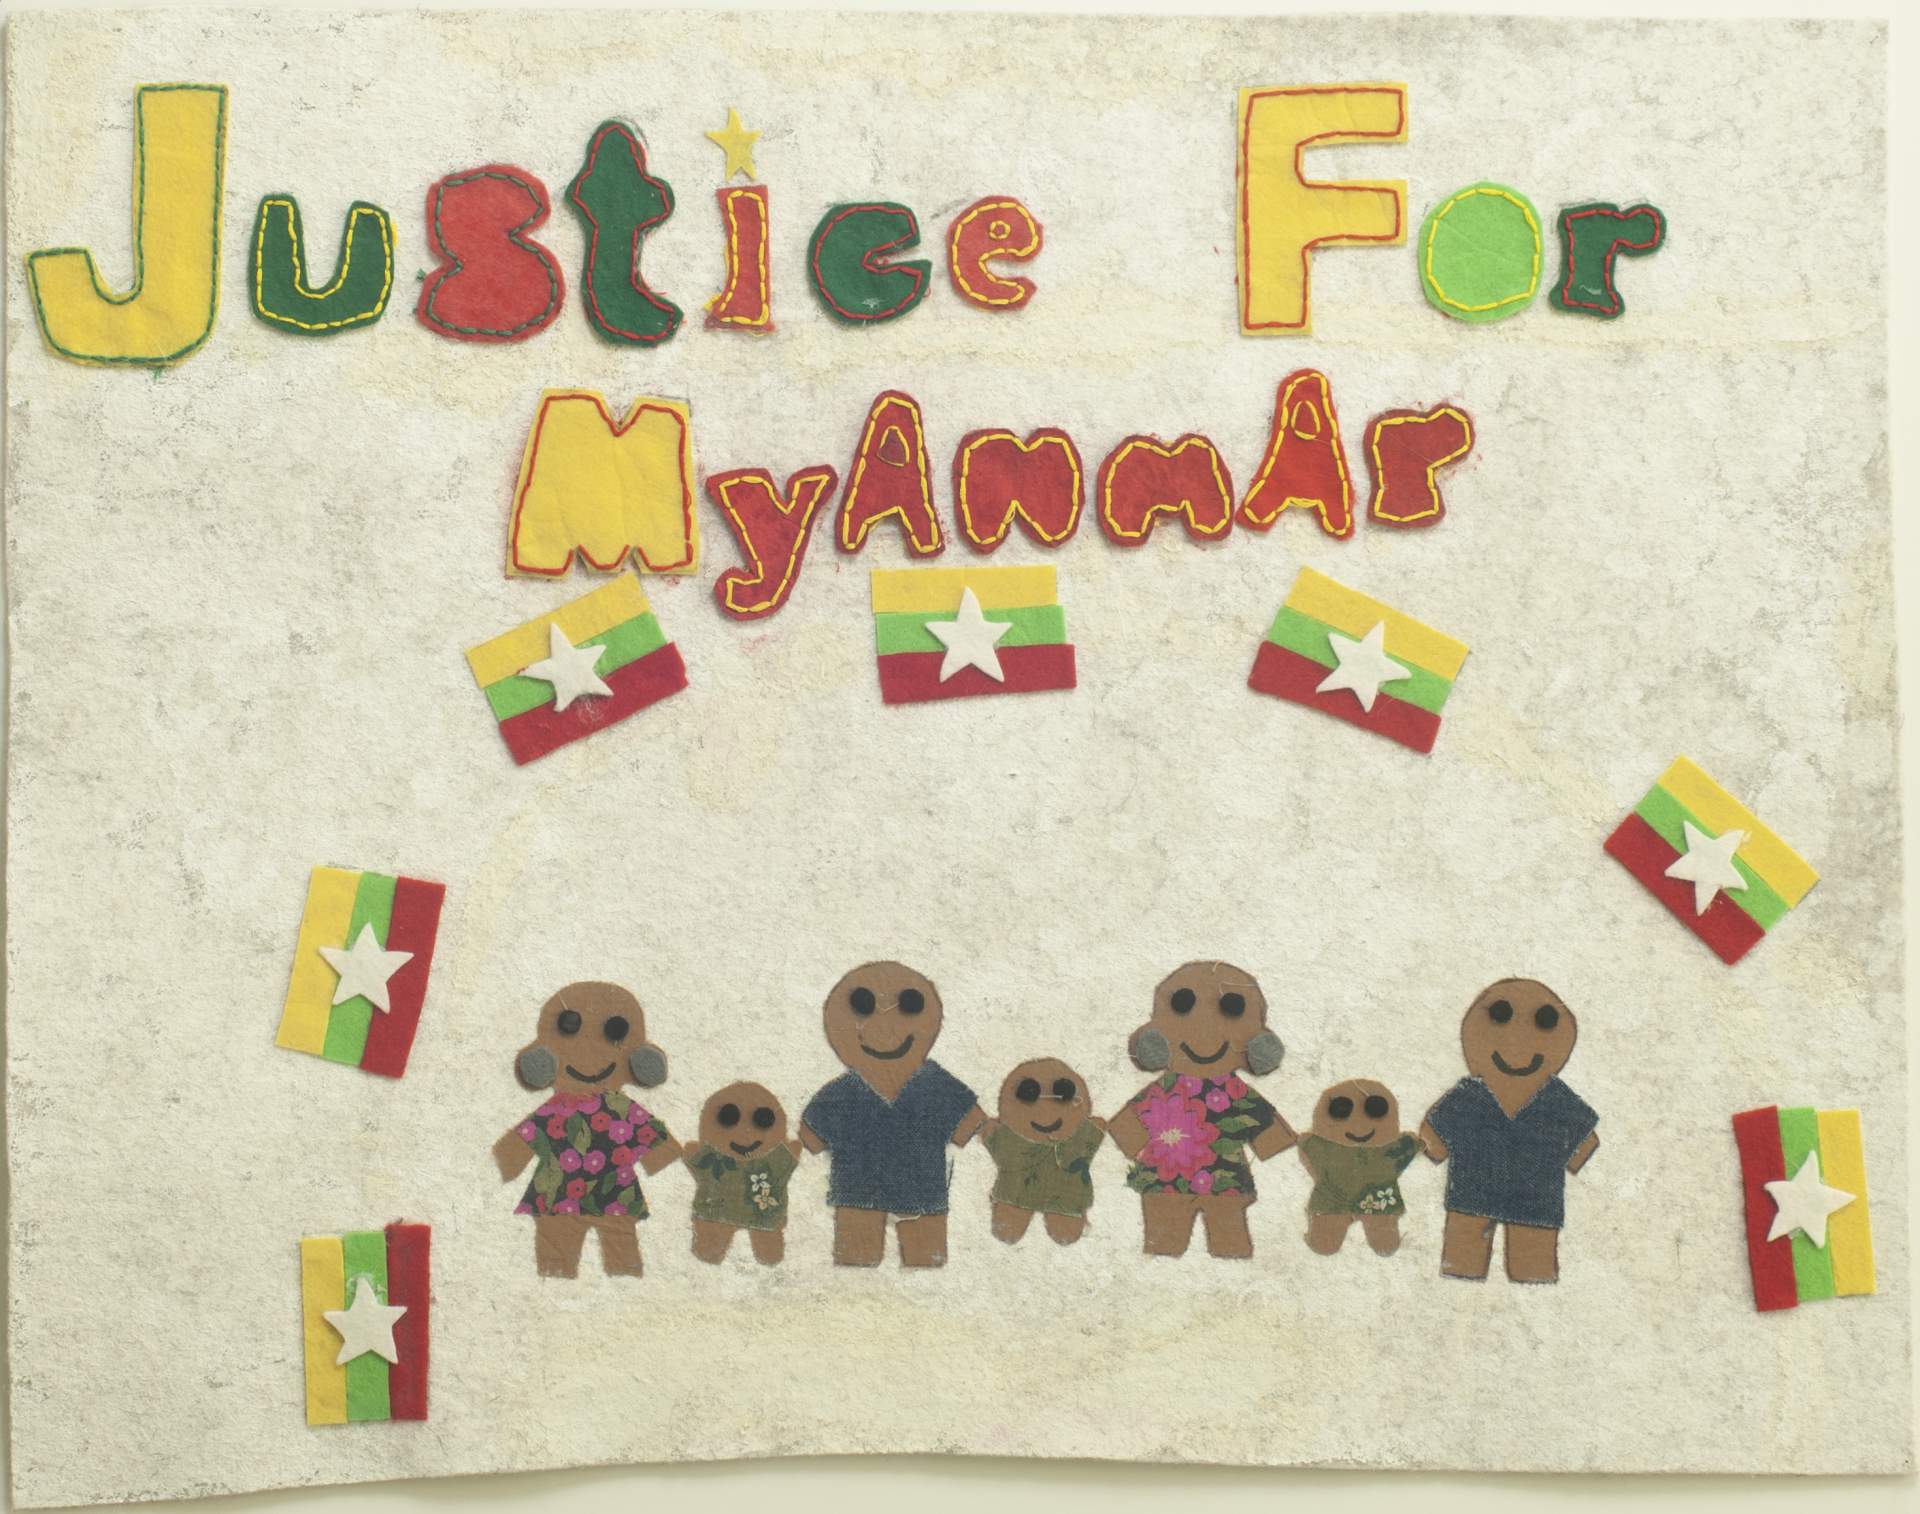 Justice for Myanmar